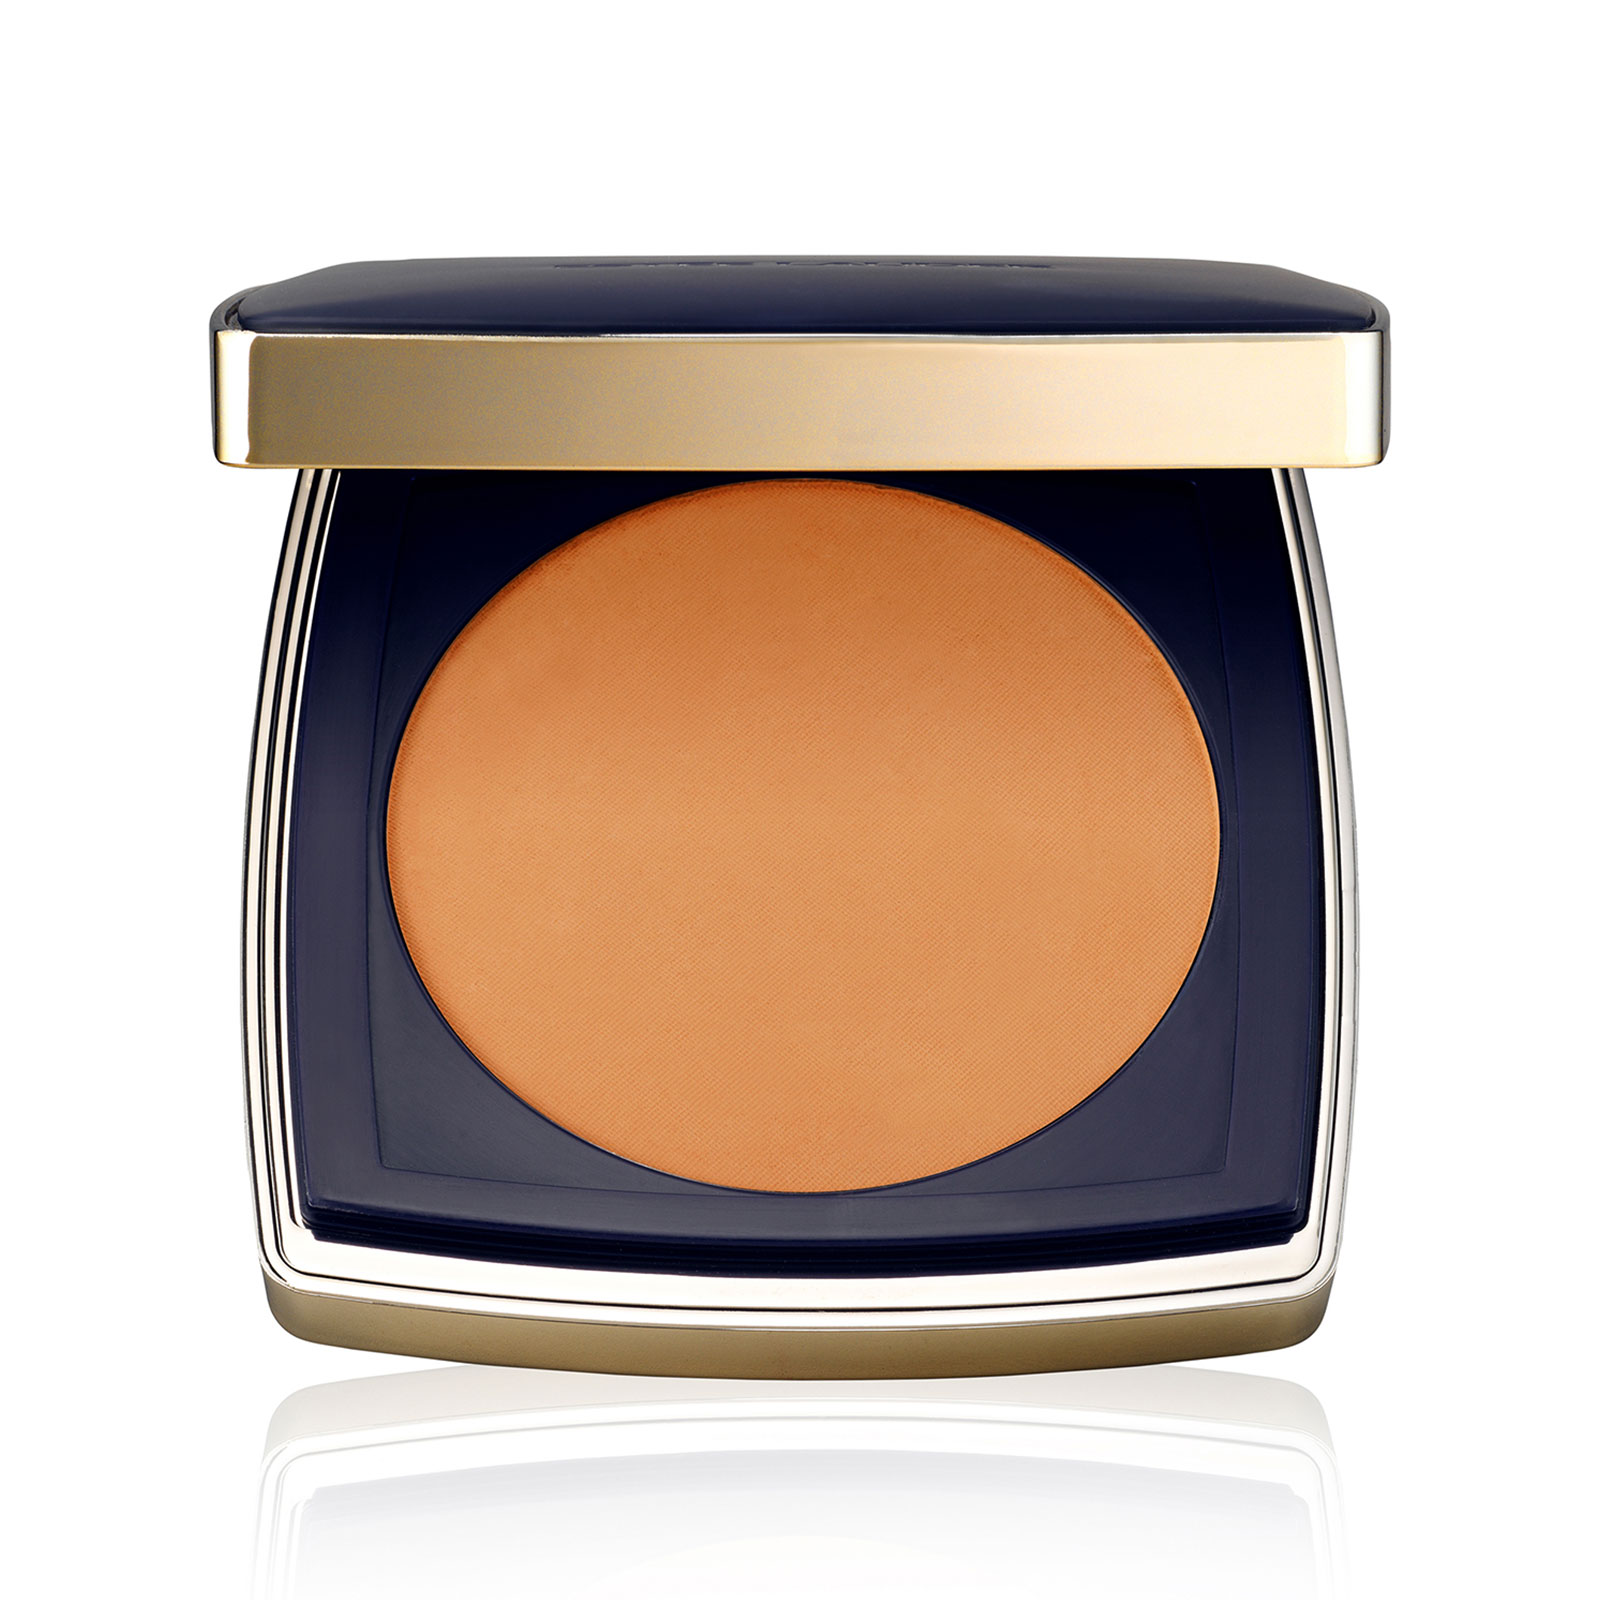 Estee Lauder Double Wear Stay-In-Place Matte Powder Foundation Spf10 12G 5N2 Amber Honey